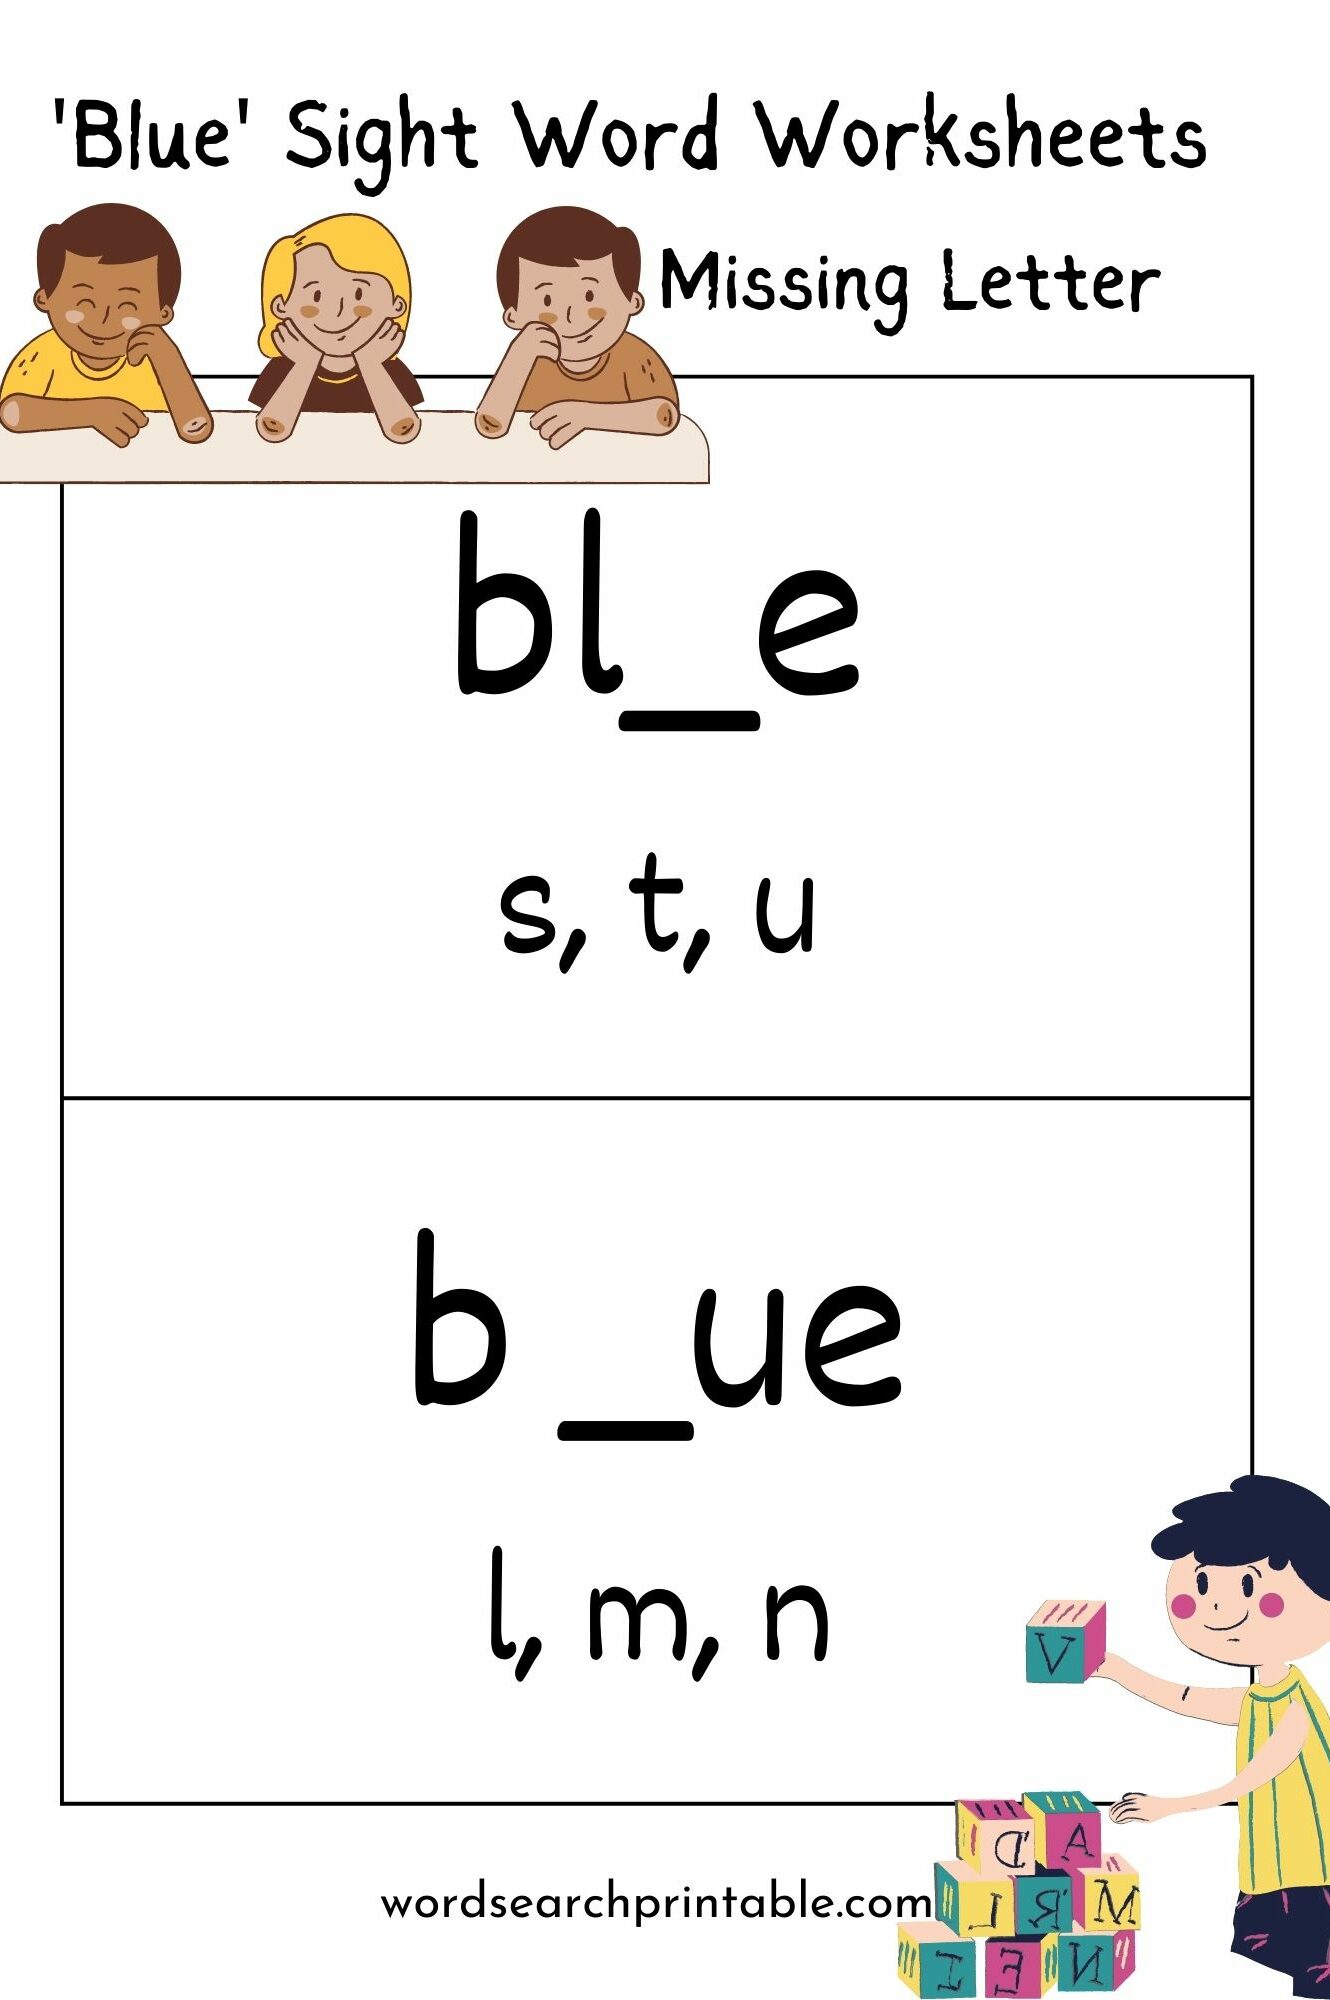 Find the Missing Letter in the sight word 'blue'